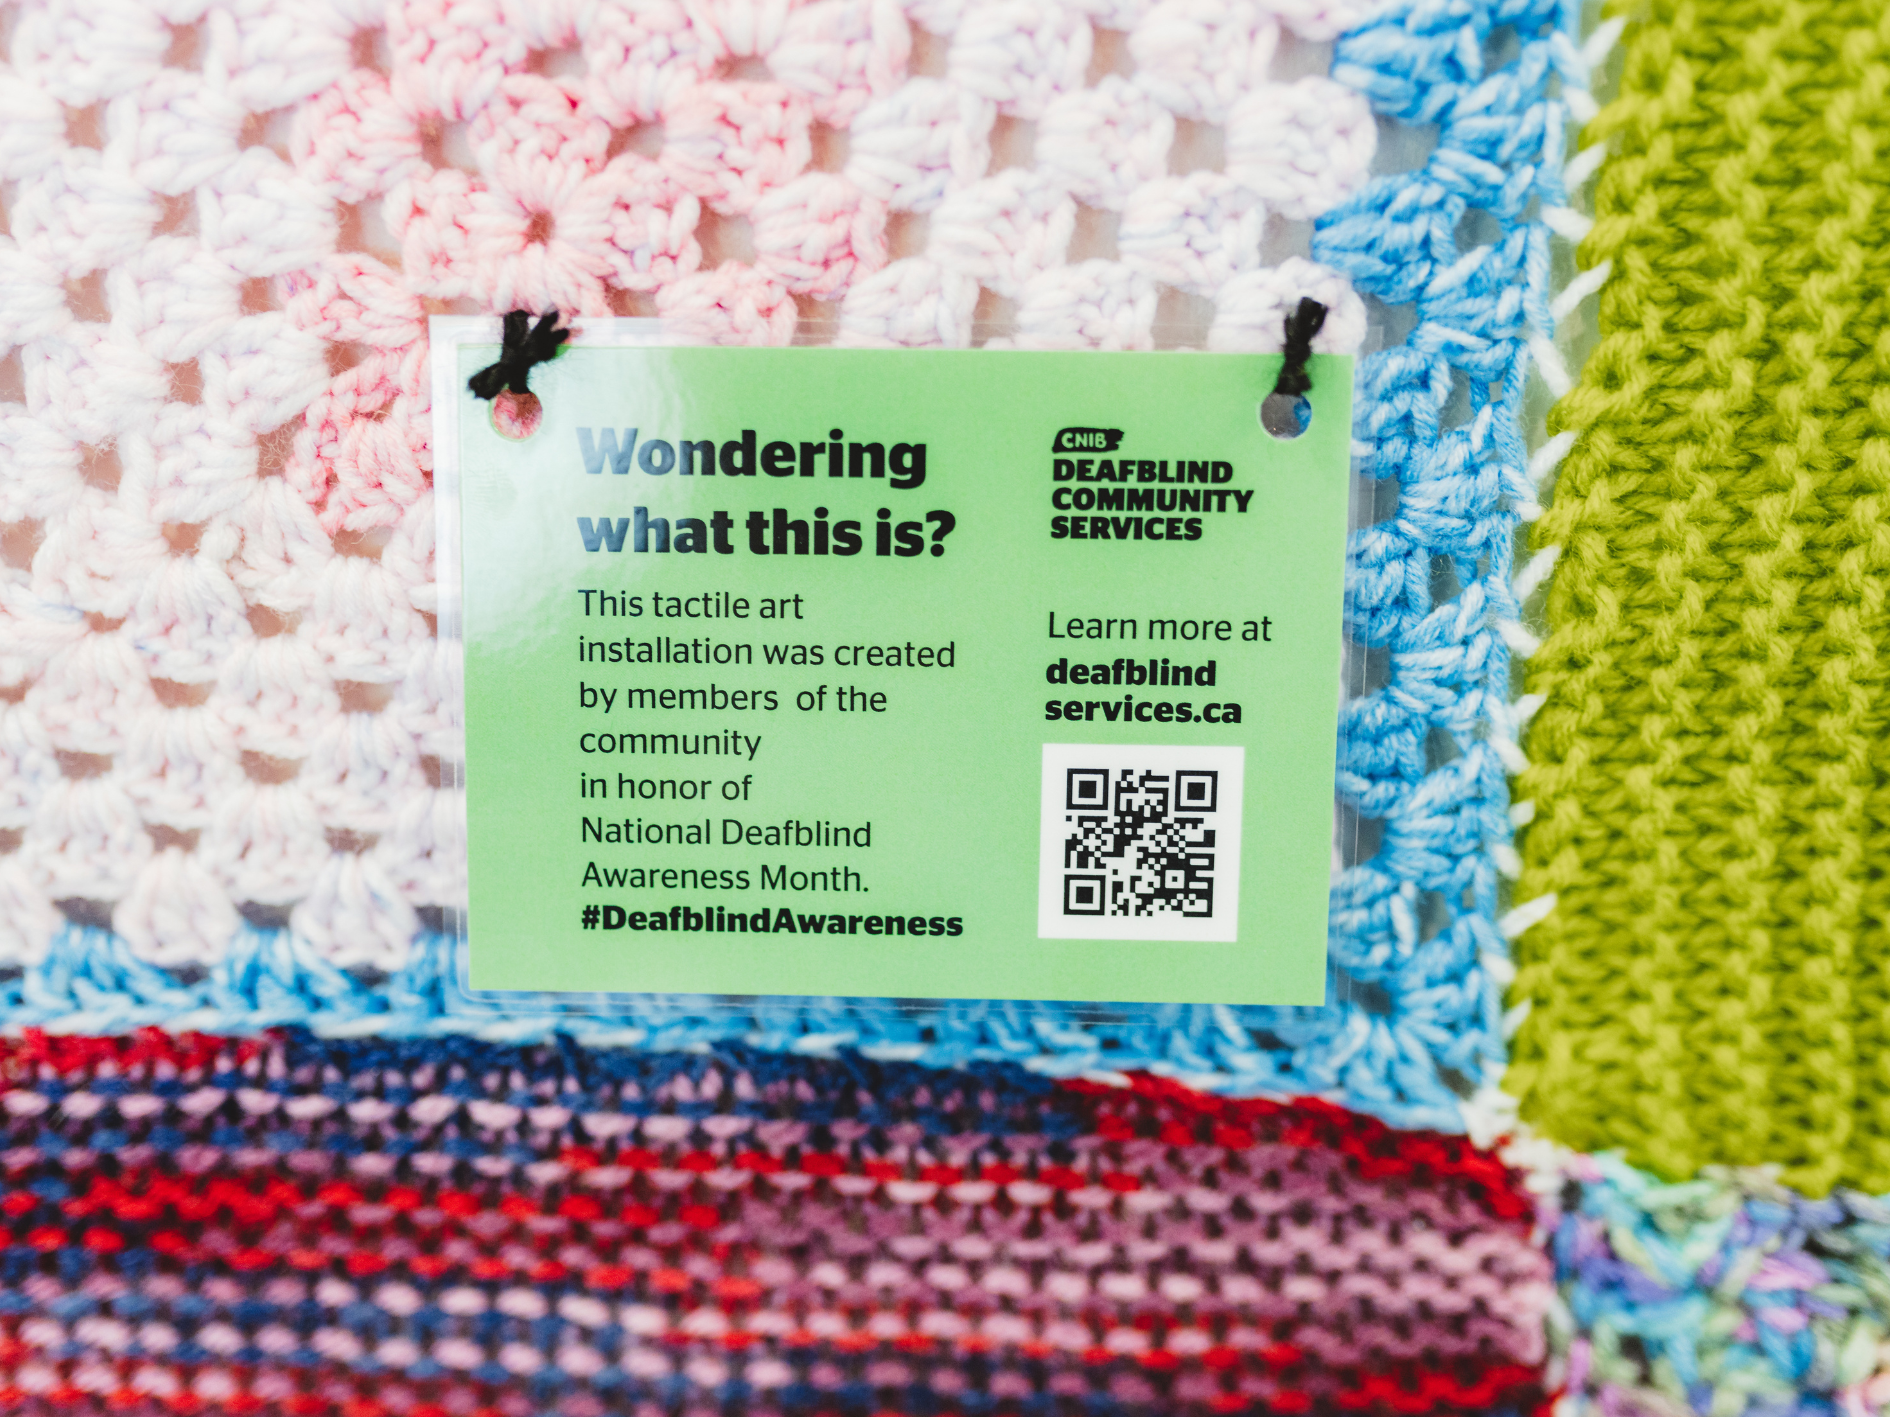 "Wondering what this is" sign on a yarn bombing installation 